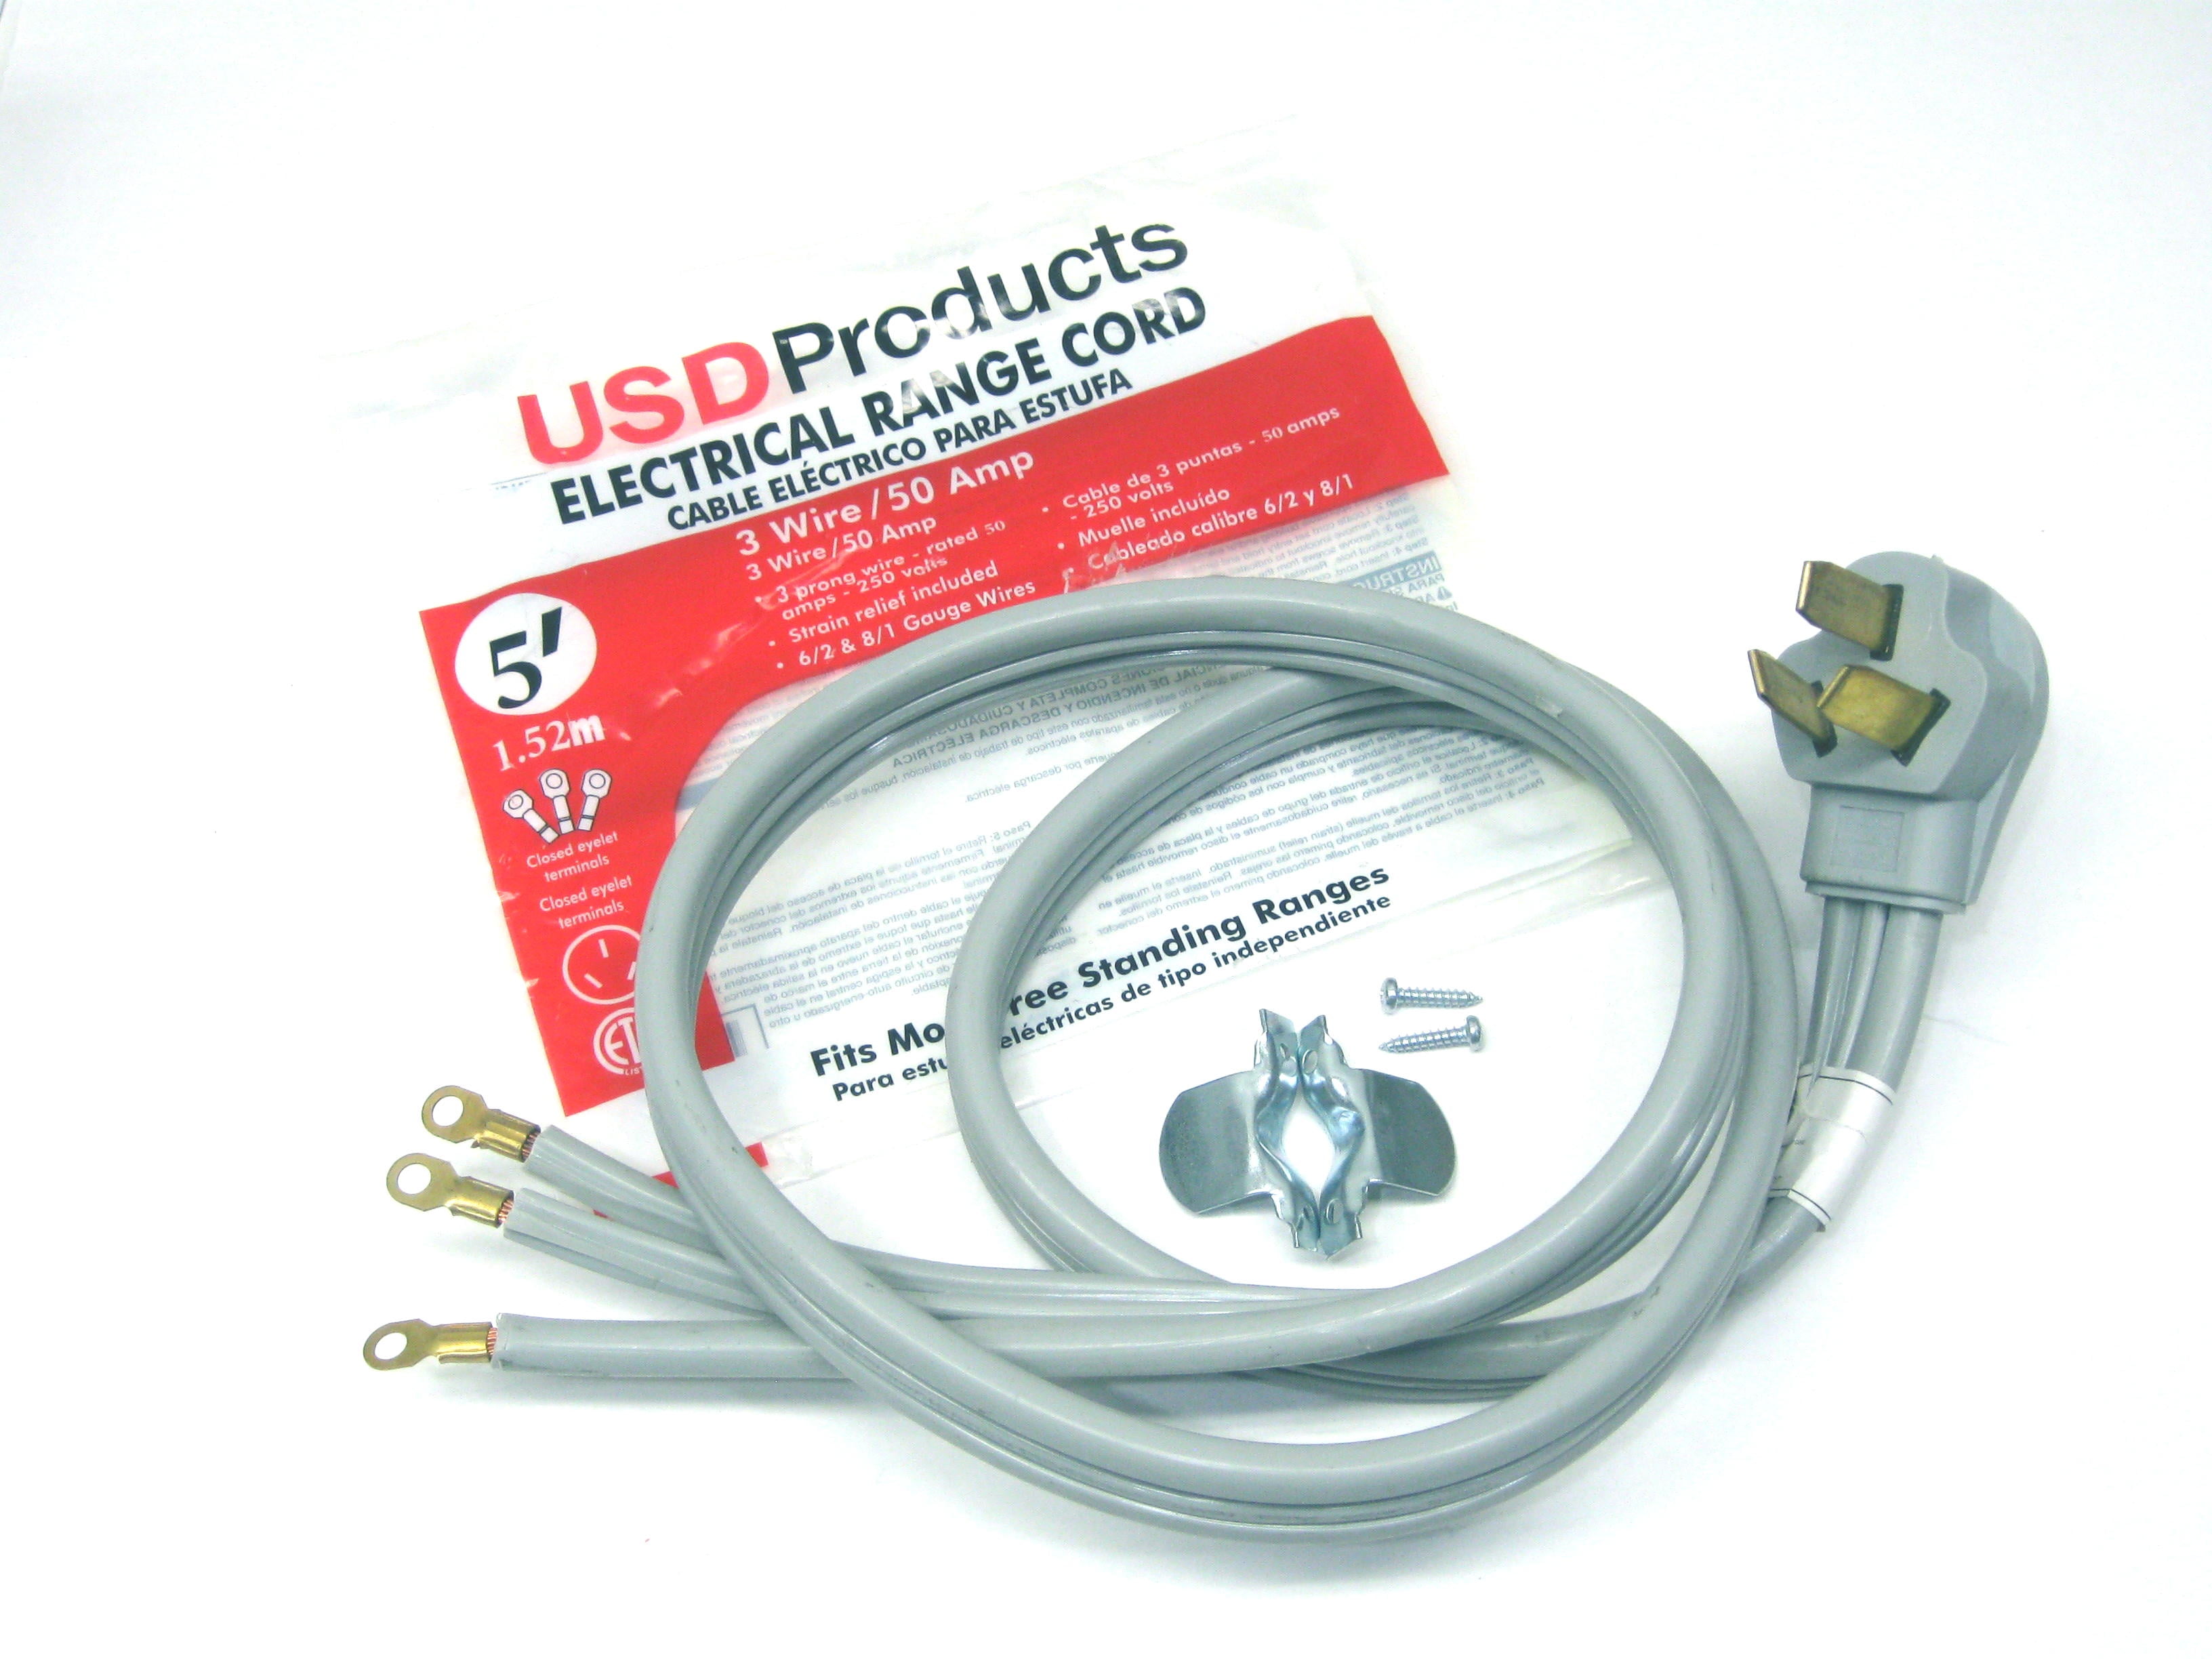 4' 4 Wire 50 AMP Details about   *NEW* Electrical Range Cord 